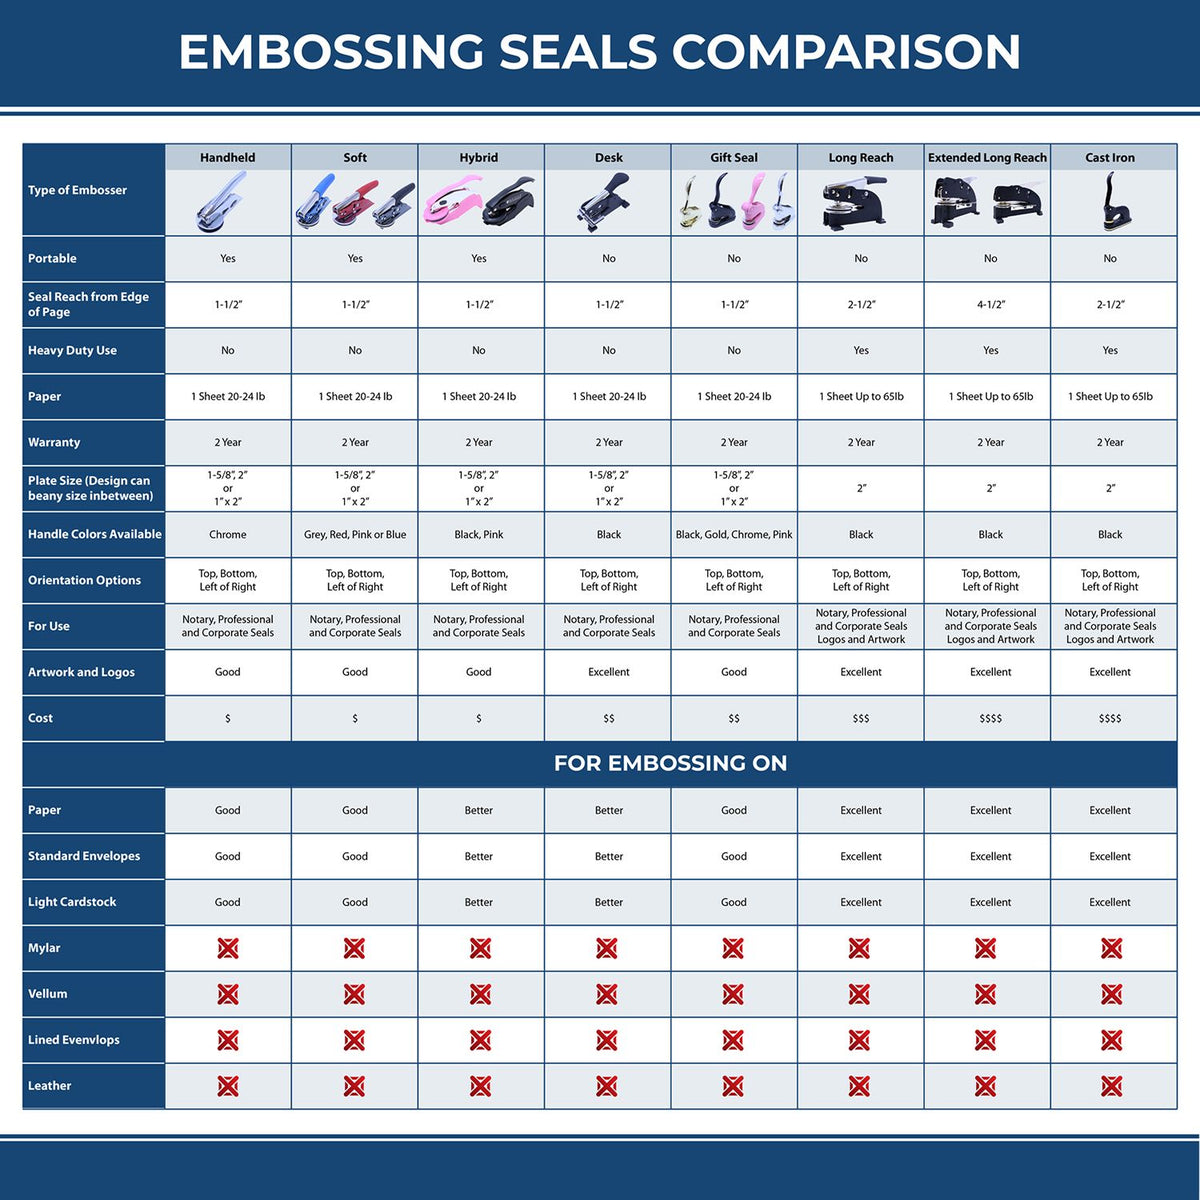 A comparison chart for the different types of mount models available for the Soft Kansas Professional Engineer Seal.